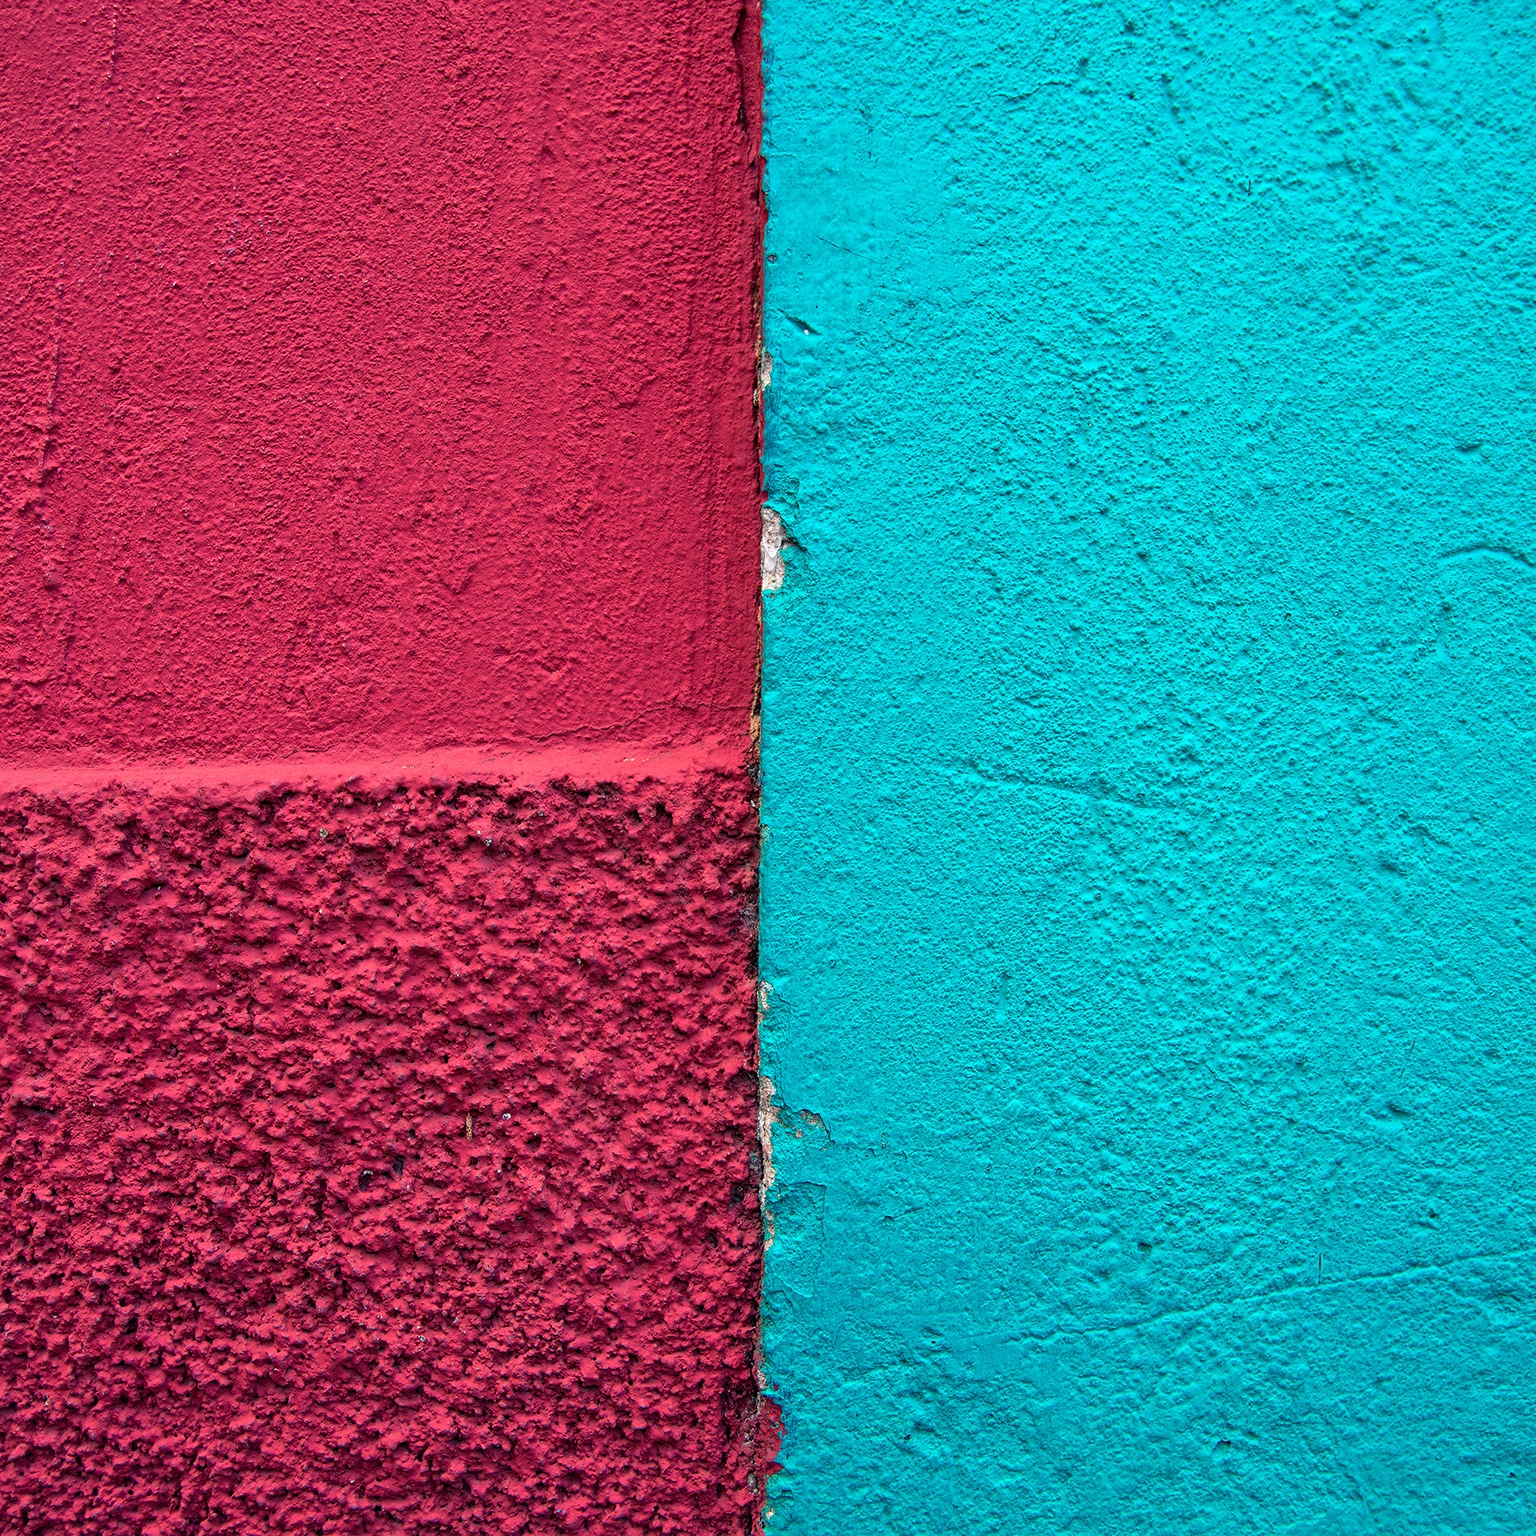 Meeting point of two colonial buildings' stucco exterior walls, one painted deep raspberry red and the other light blue